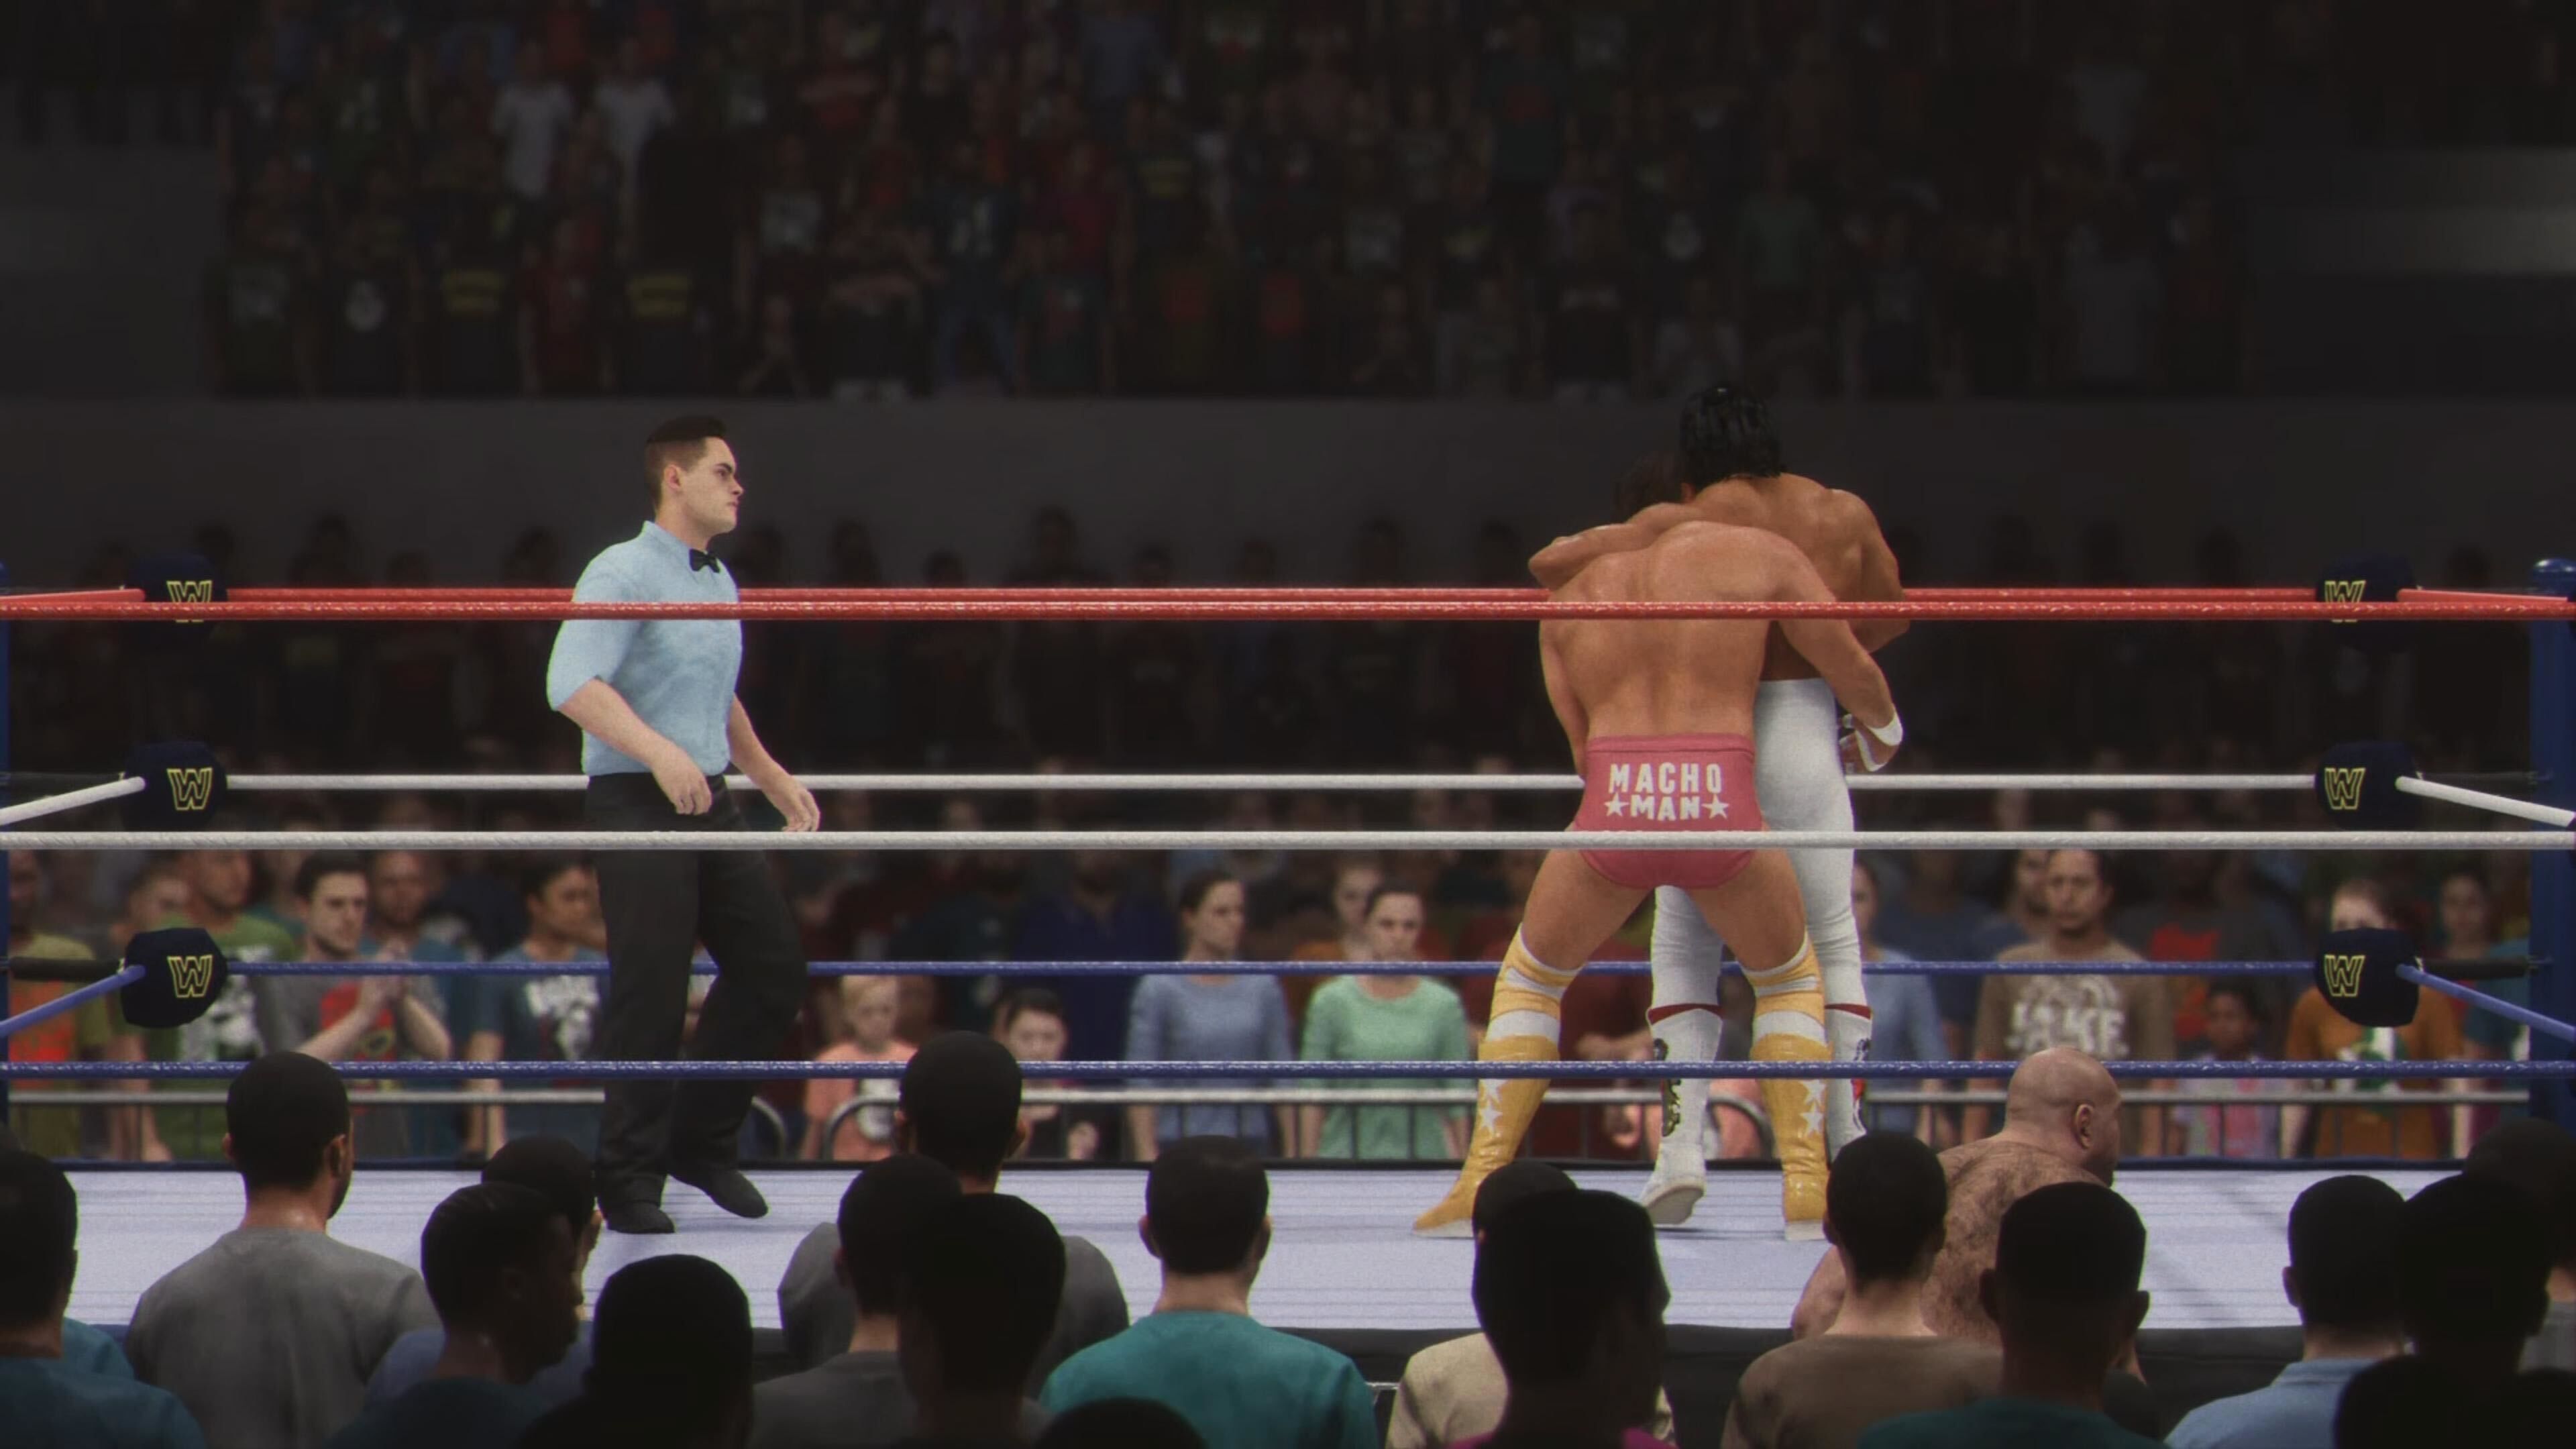 Randy Savage and Ricky Steamboat in a match in WWE 2K24